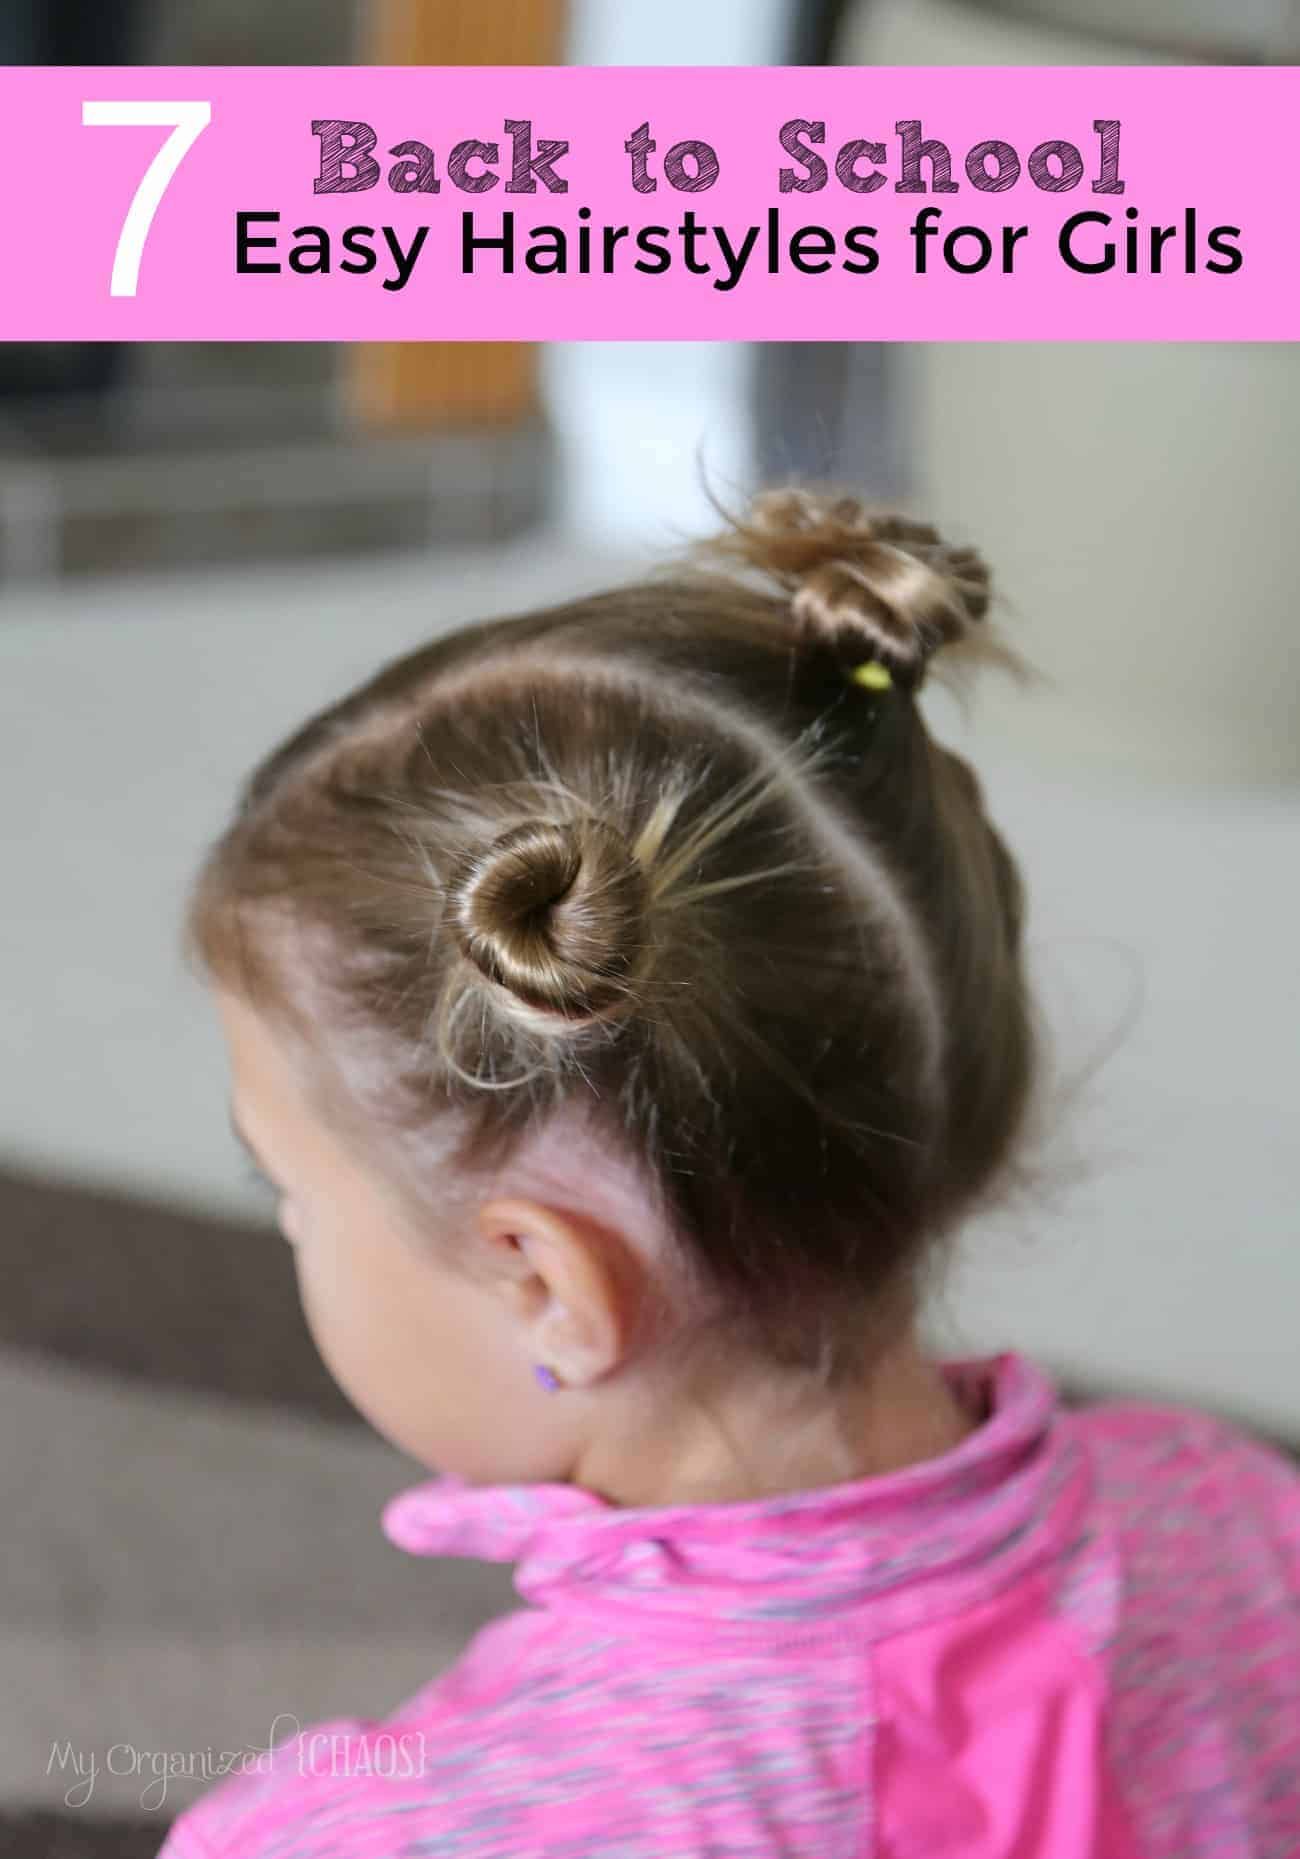 Easy Hairstyles to Start Off Your Day the Right Way! - Fun Cheap or Free